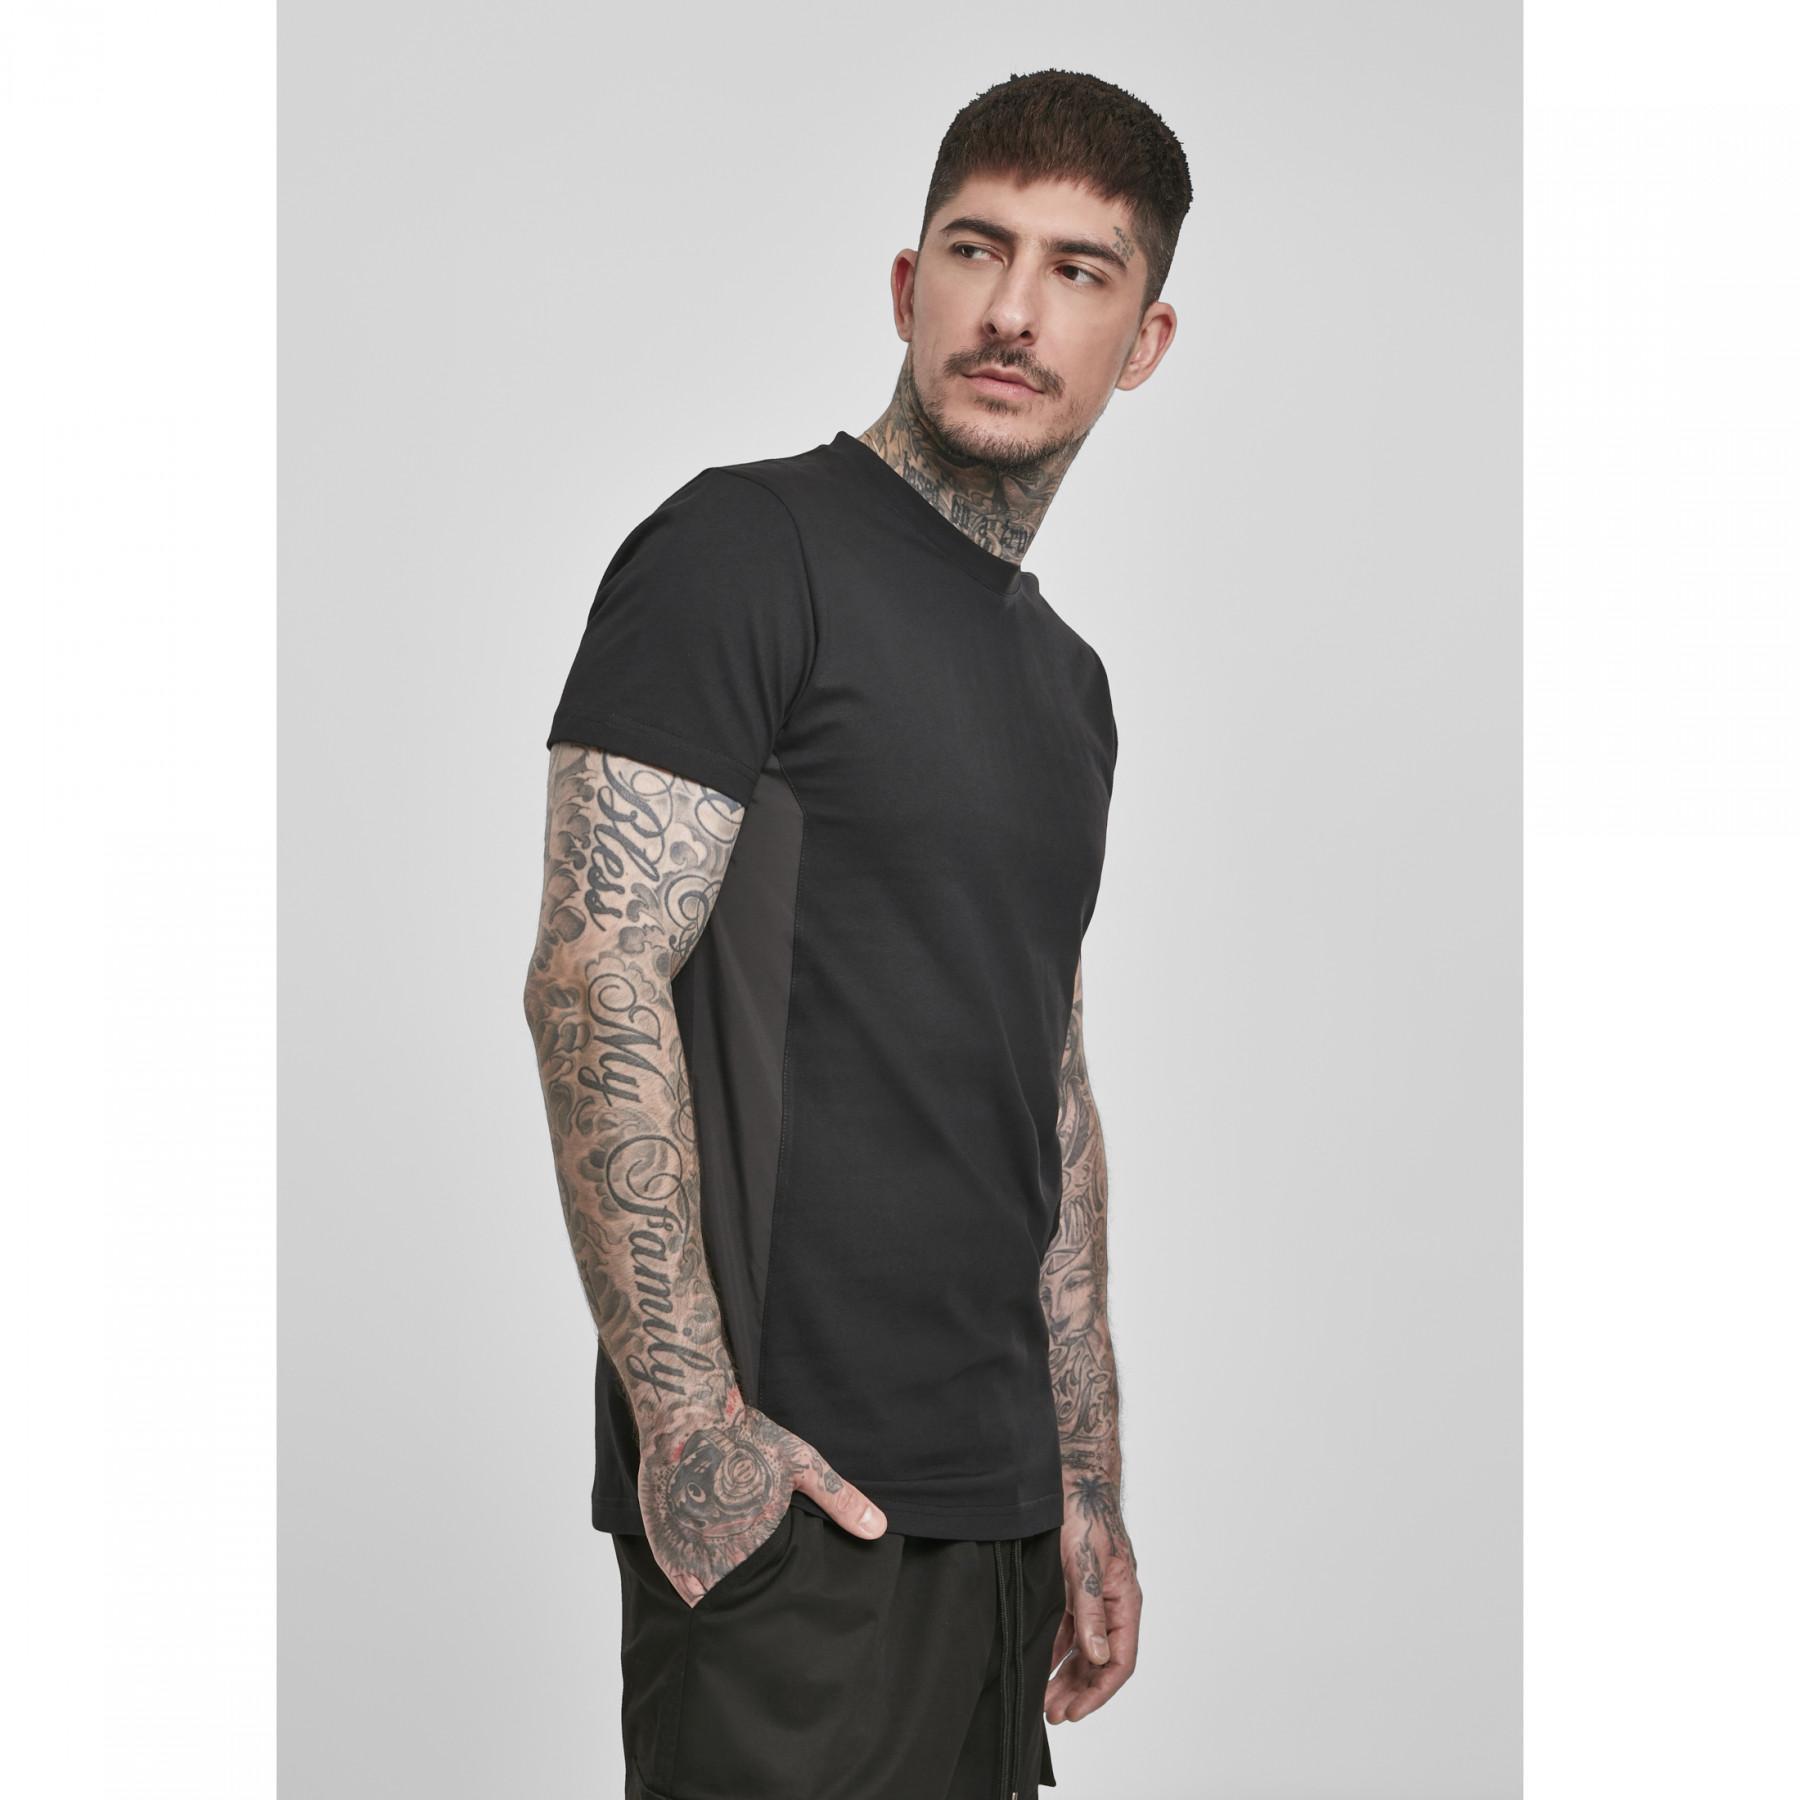 T-shirt urban classic military mucle